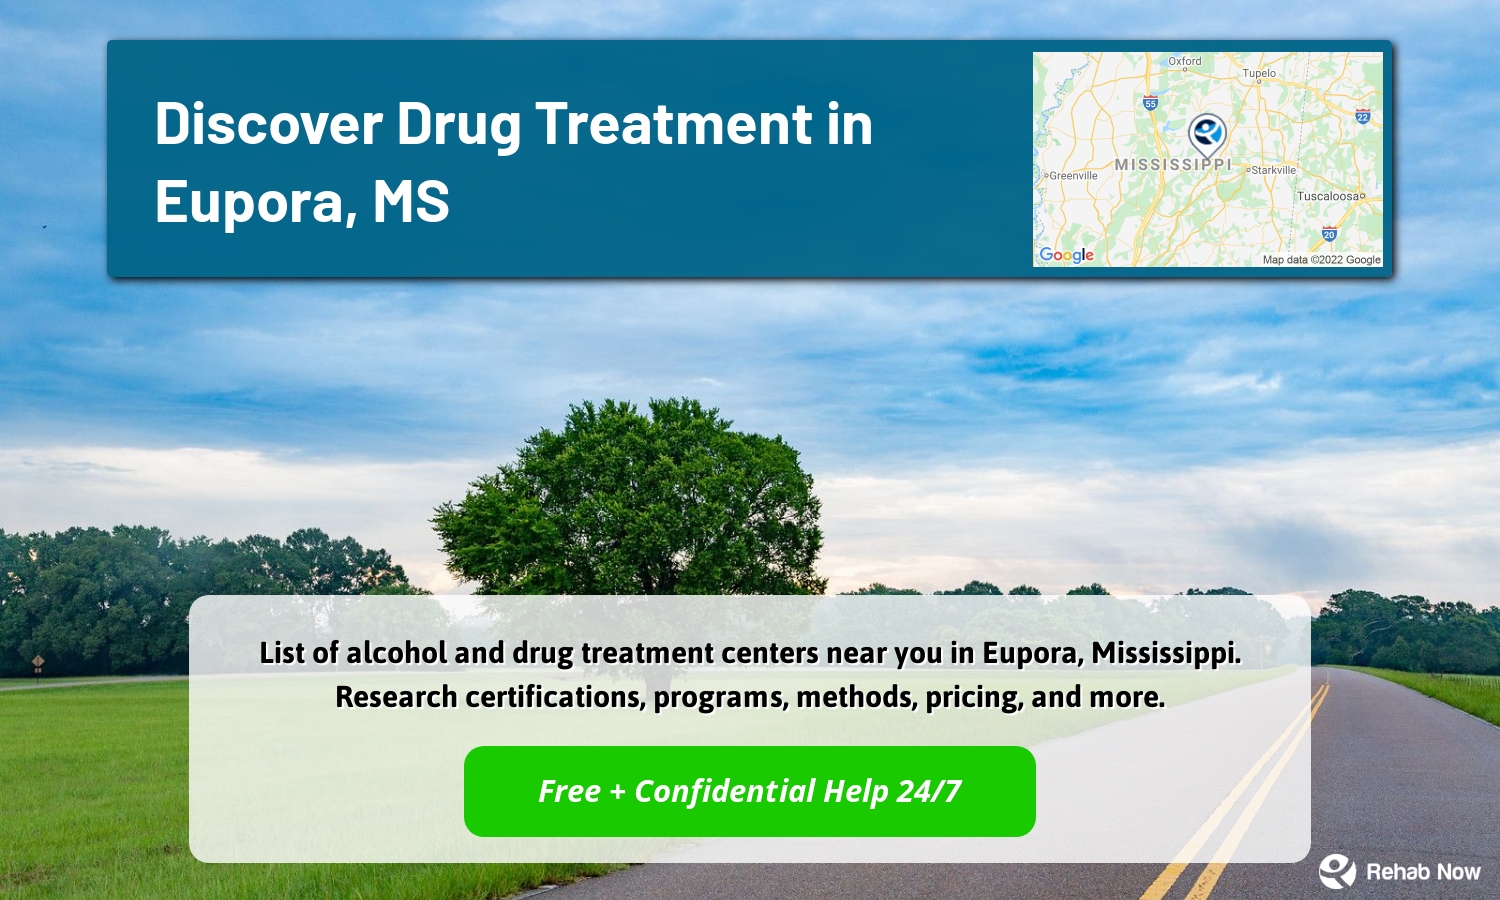 List of alcohol and drug treatment centers near you in Eupora, Mississippi. Research certifications, programs, methods, pricing, and more.